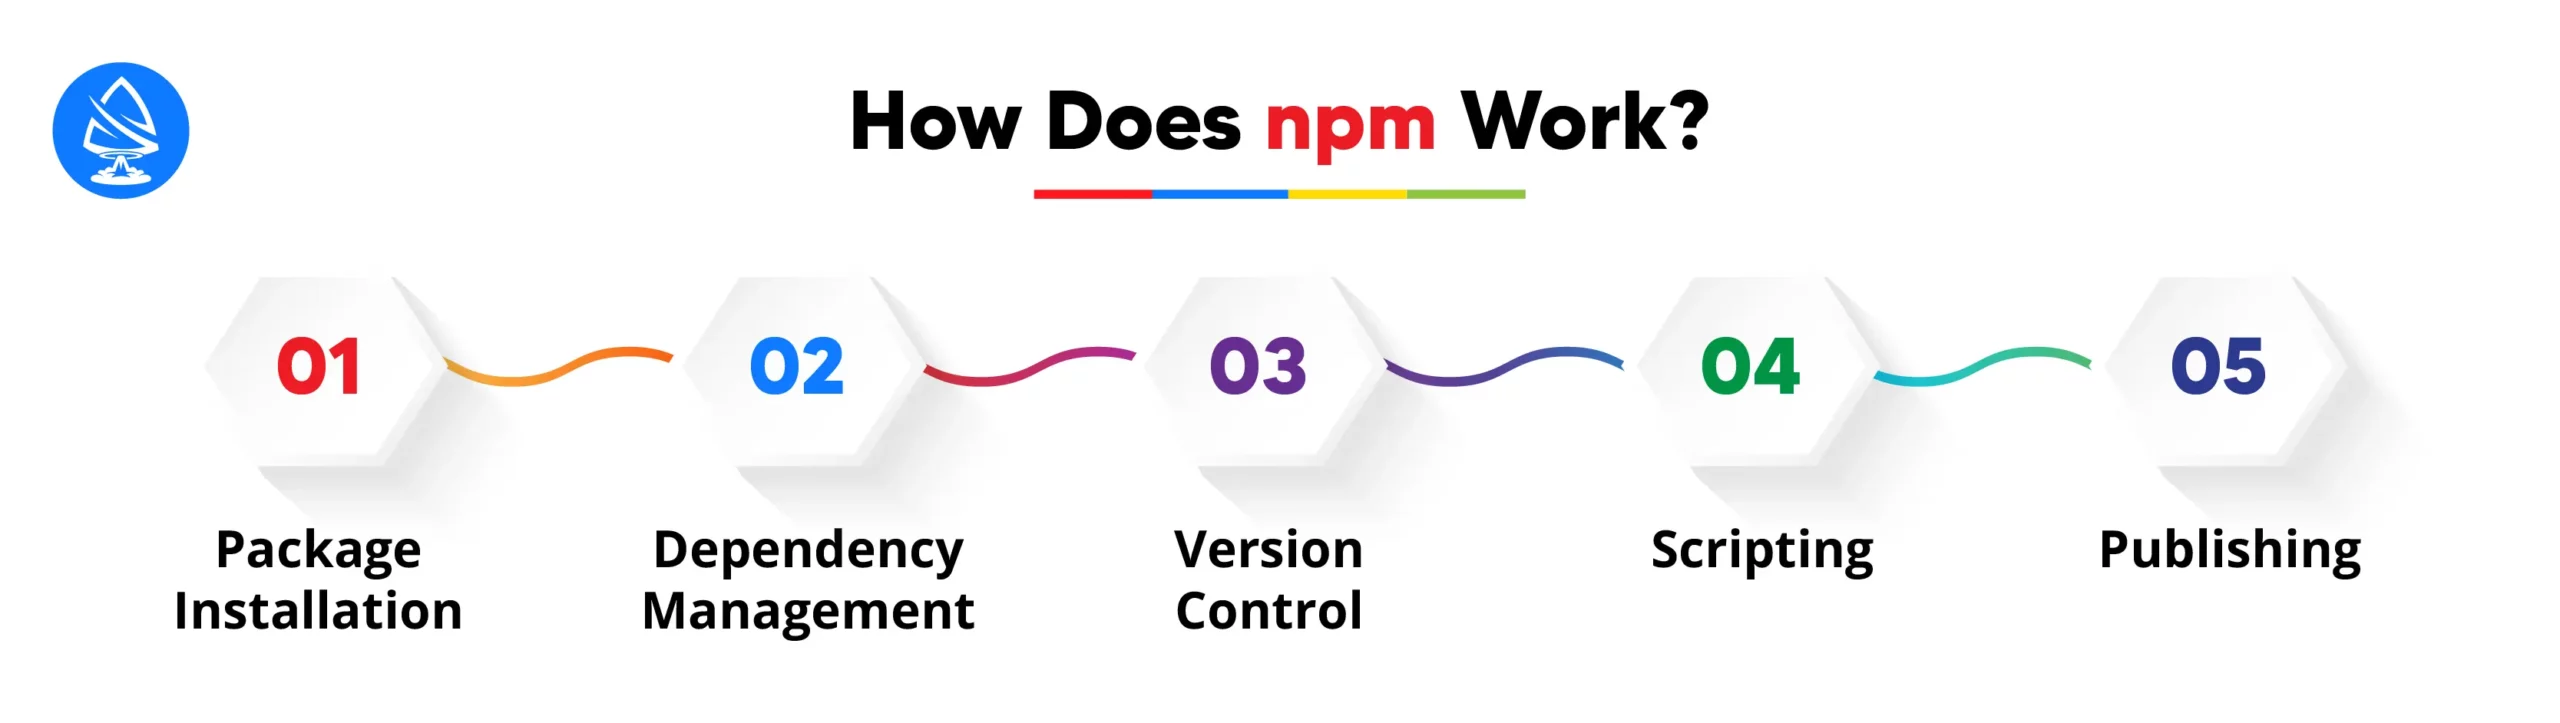 How does npm work? 